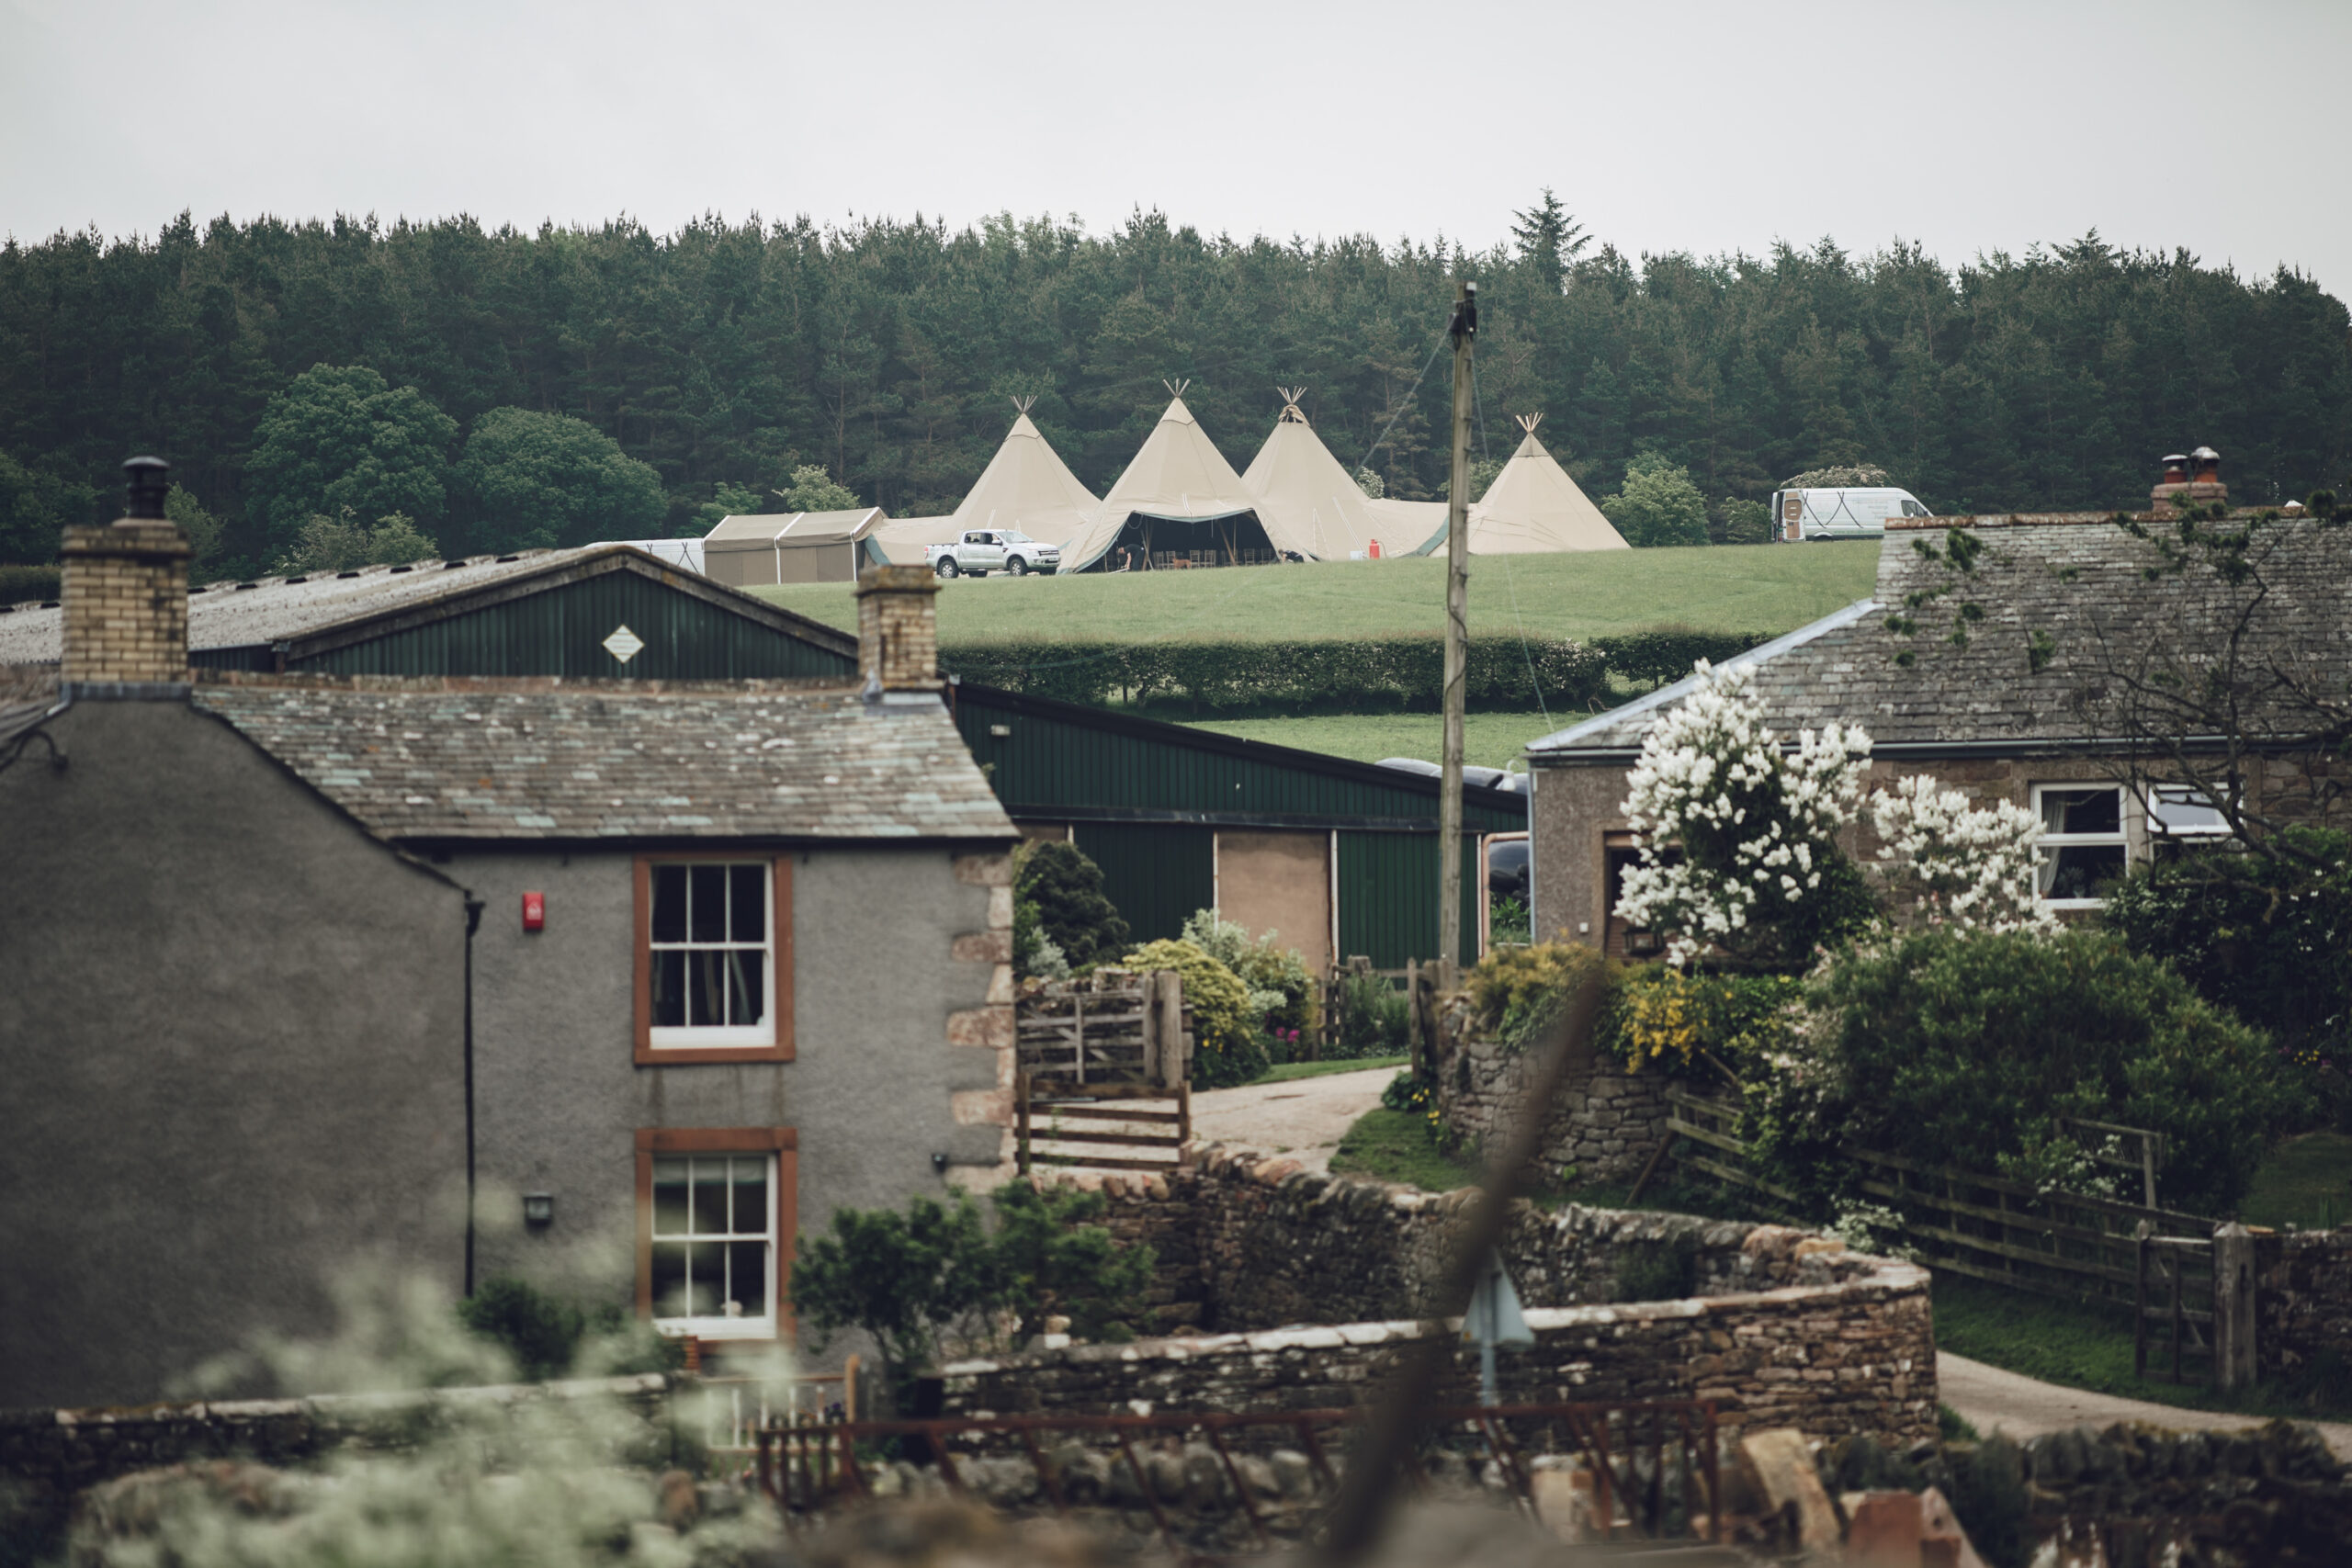 Tipis on the farm - Three Giant Hat Tipis on a hill overlooking the farm - Tipis in Cumbria - Marquee Hire - Tipi Hire